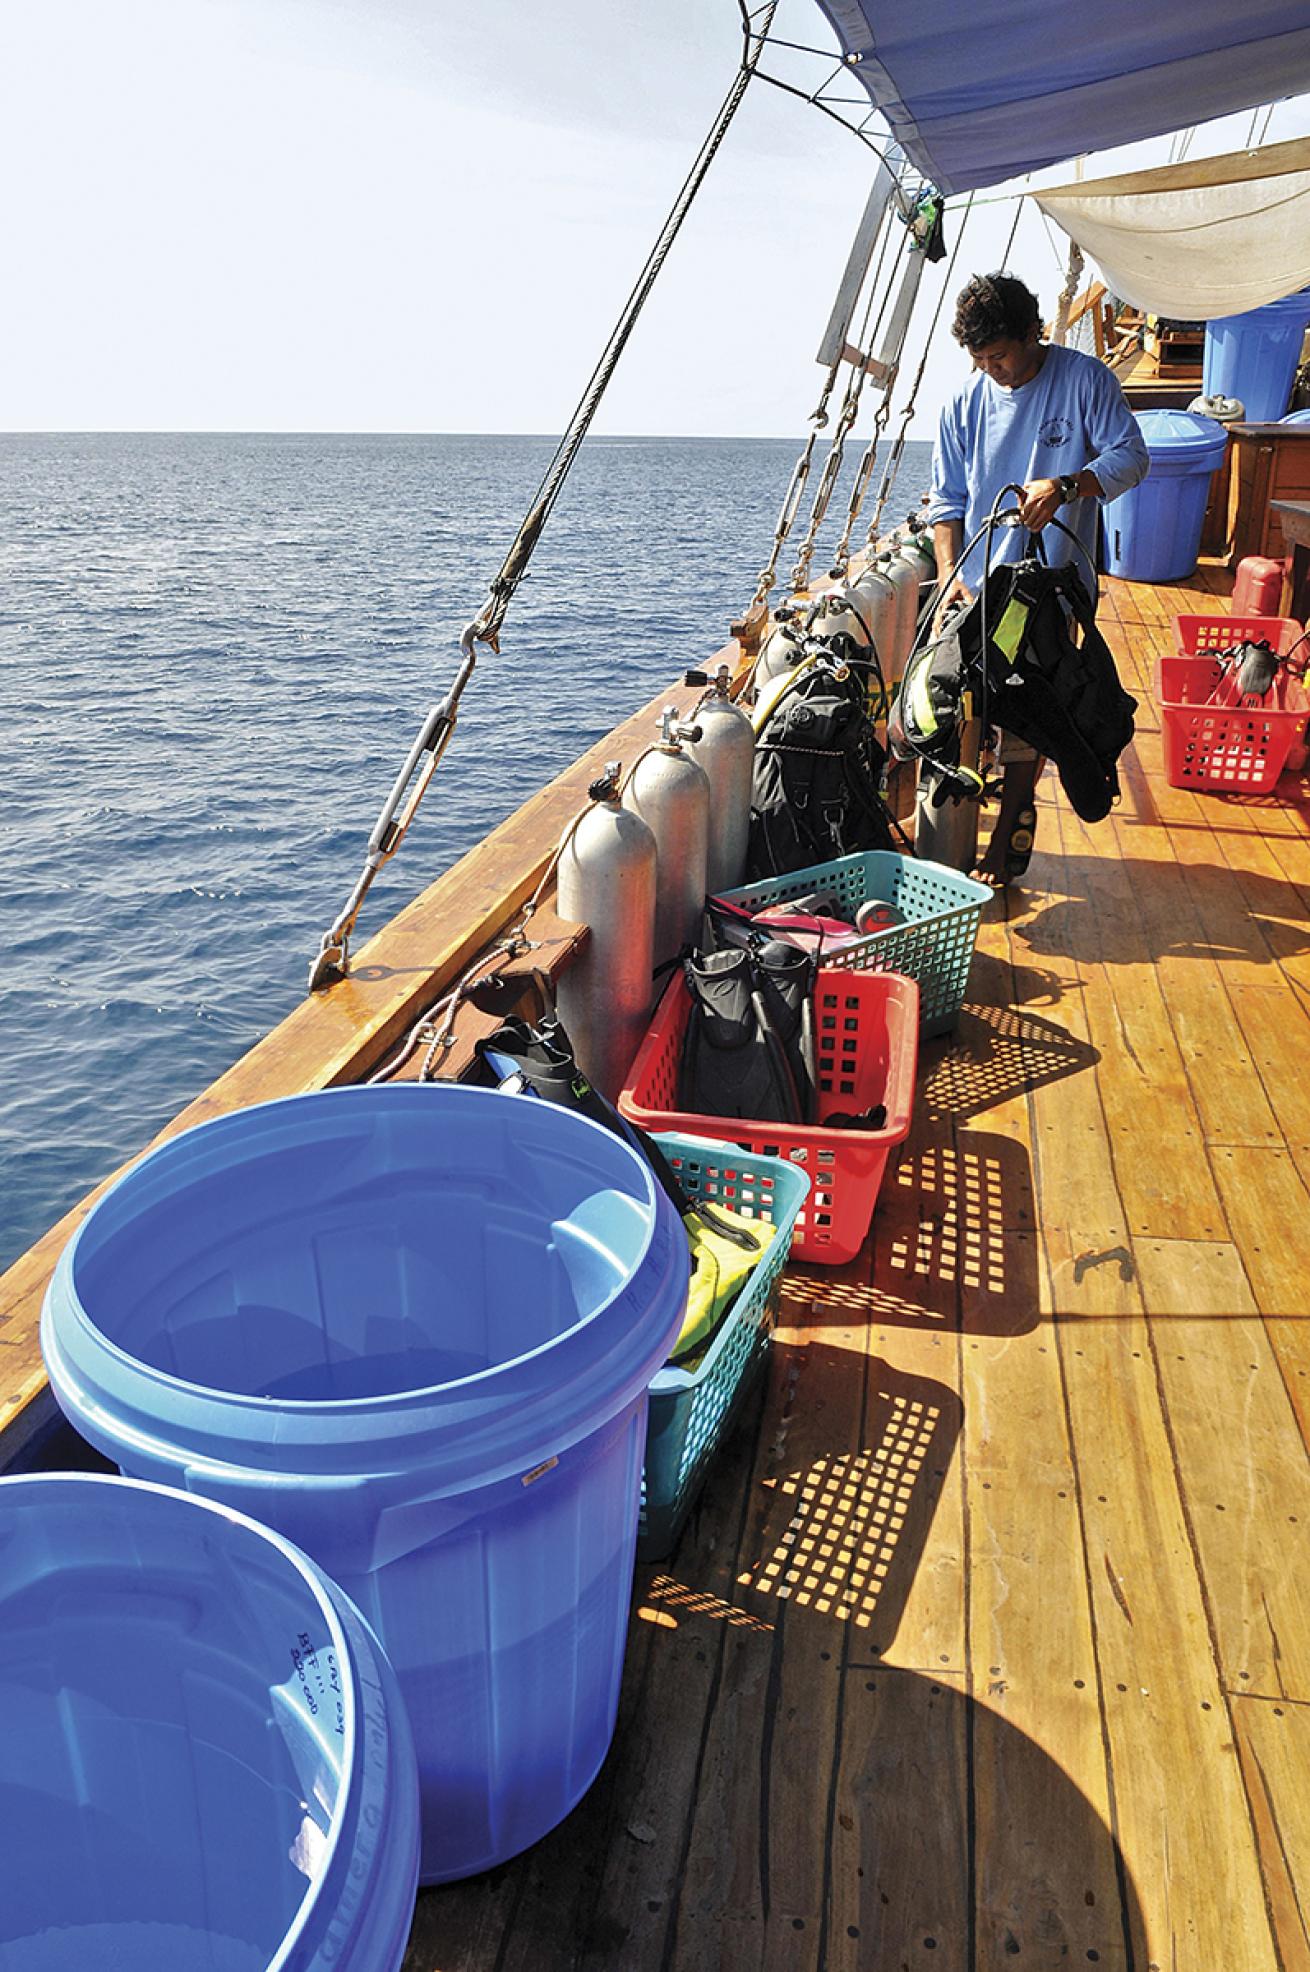 Scuba wash buckets and gear on a liveaboard